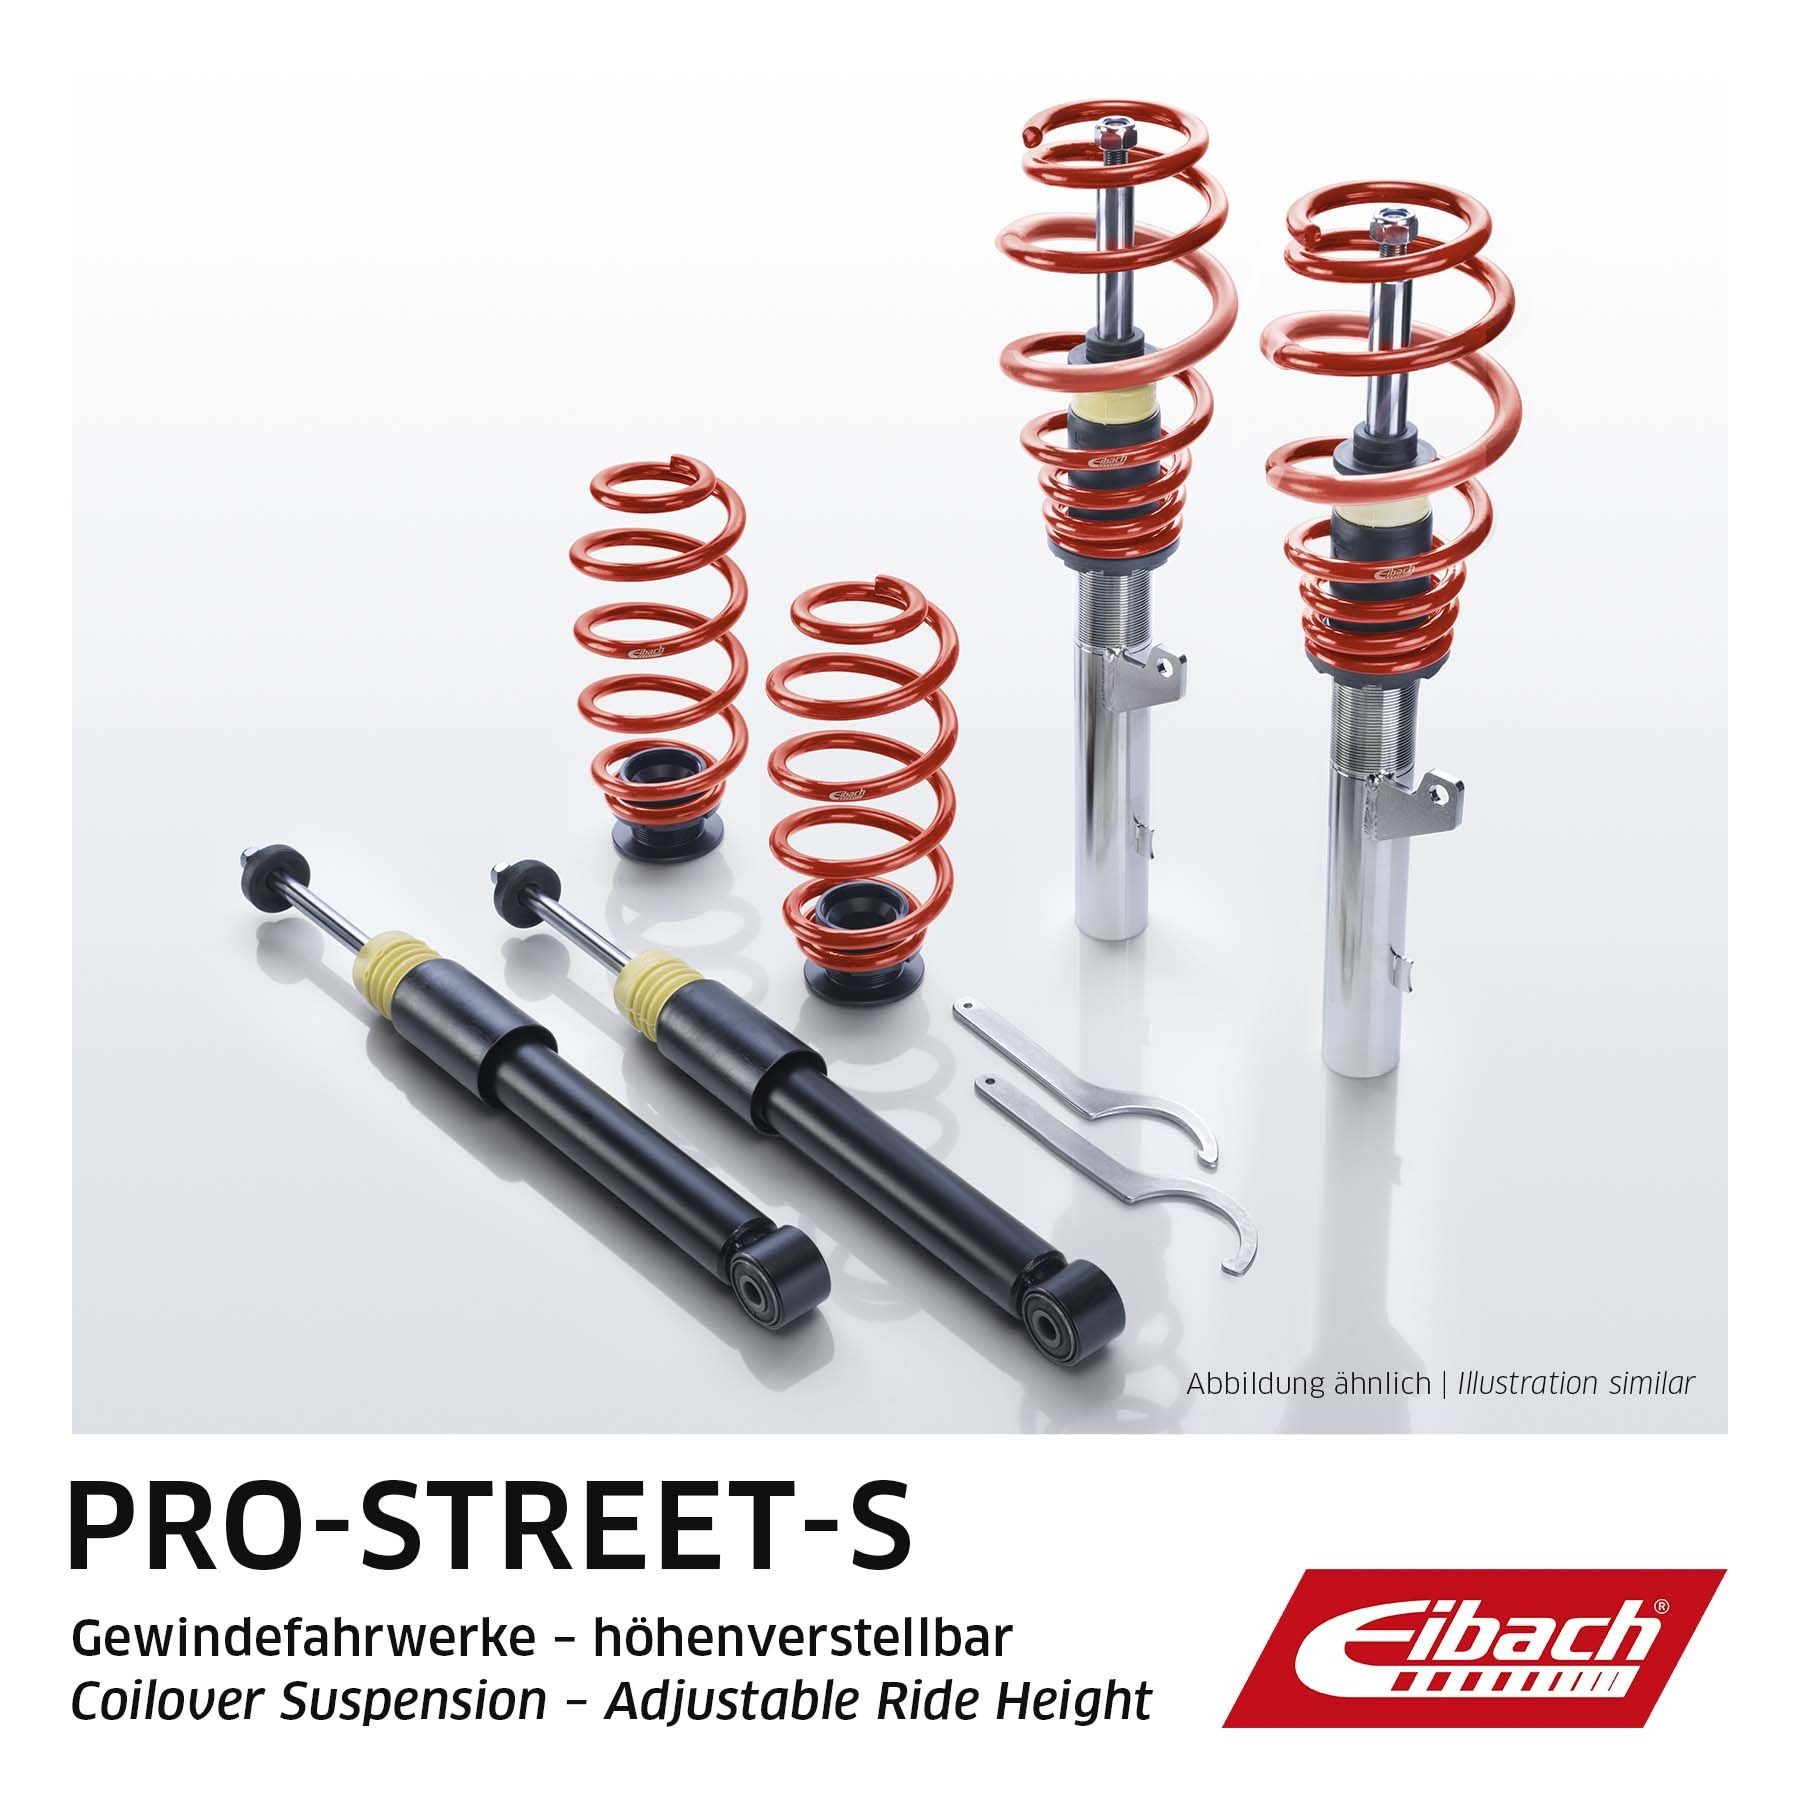 EIBACH PSS65-85-014-03-22 Suspension kit, coil springs / shock absorbers Golf 5